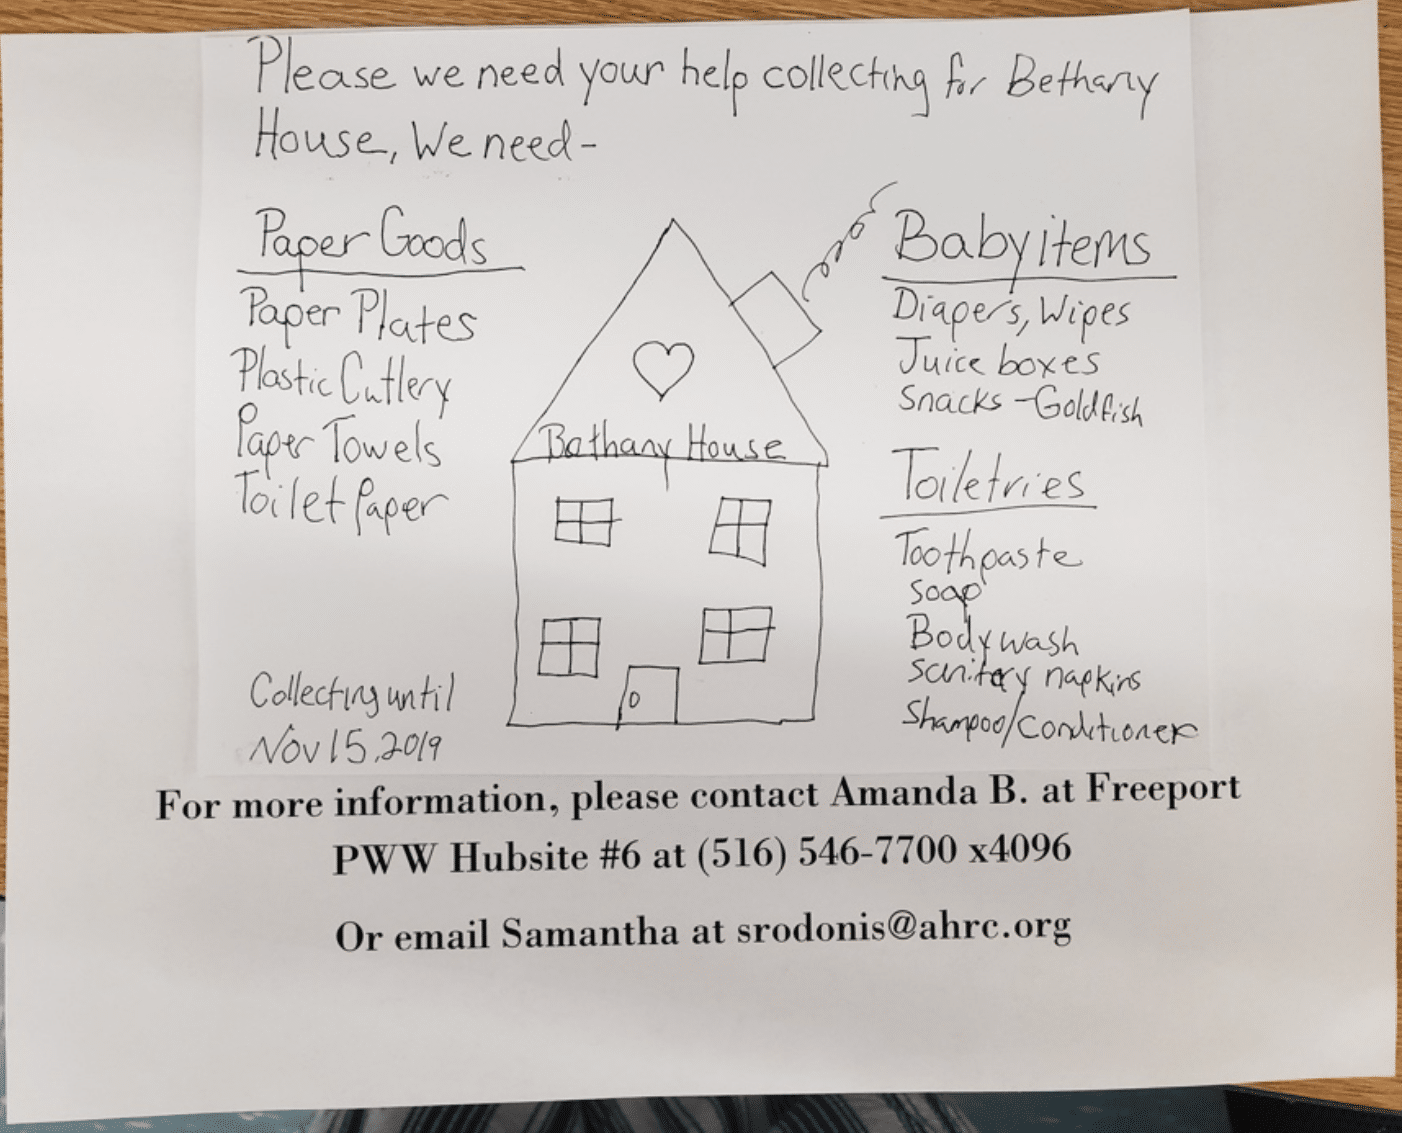 Flyer distributed by Amanda Brosnan requesting donations of paper goods, baby items, and toiletries for Bethany House